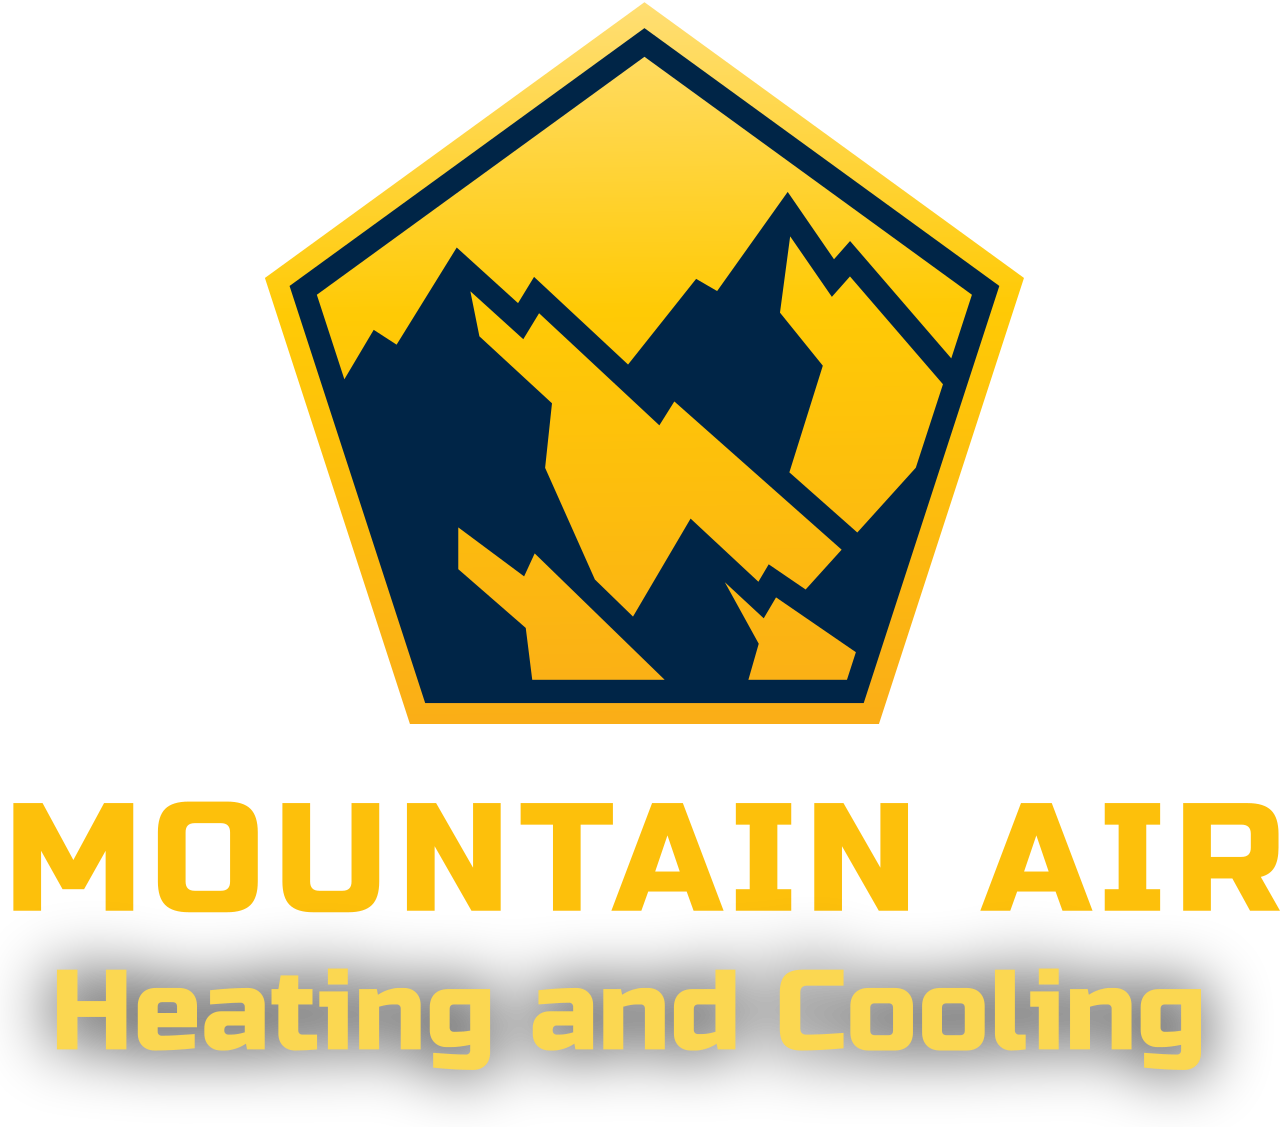 Mountain Air's web page